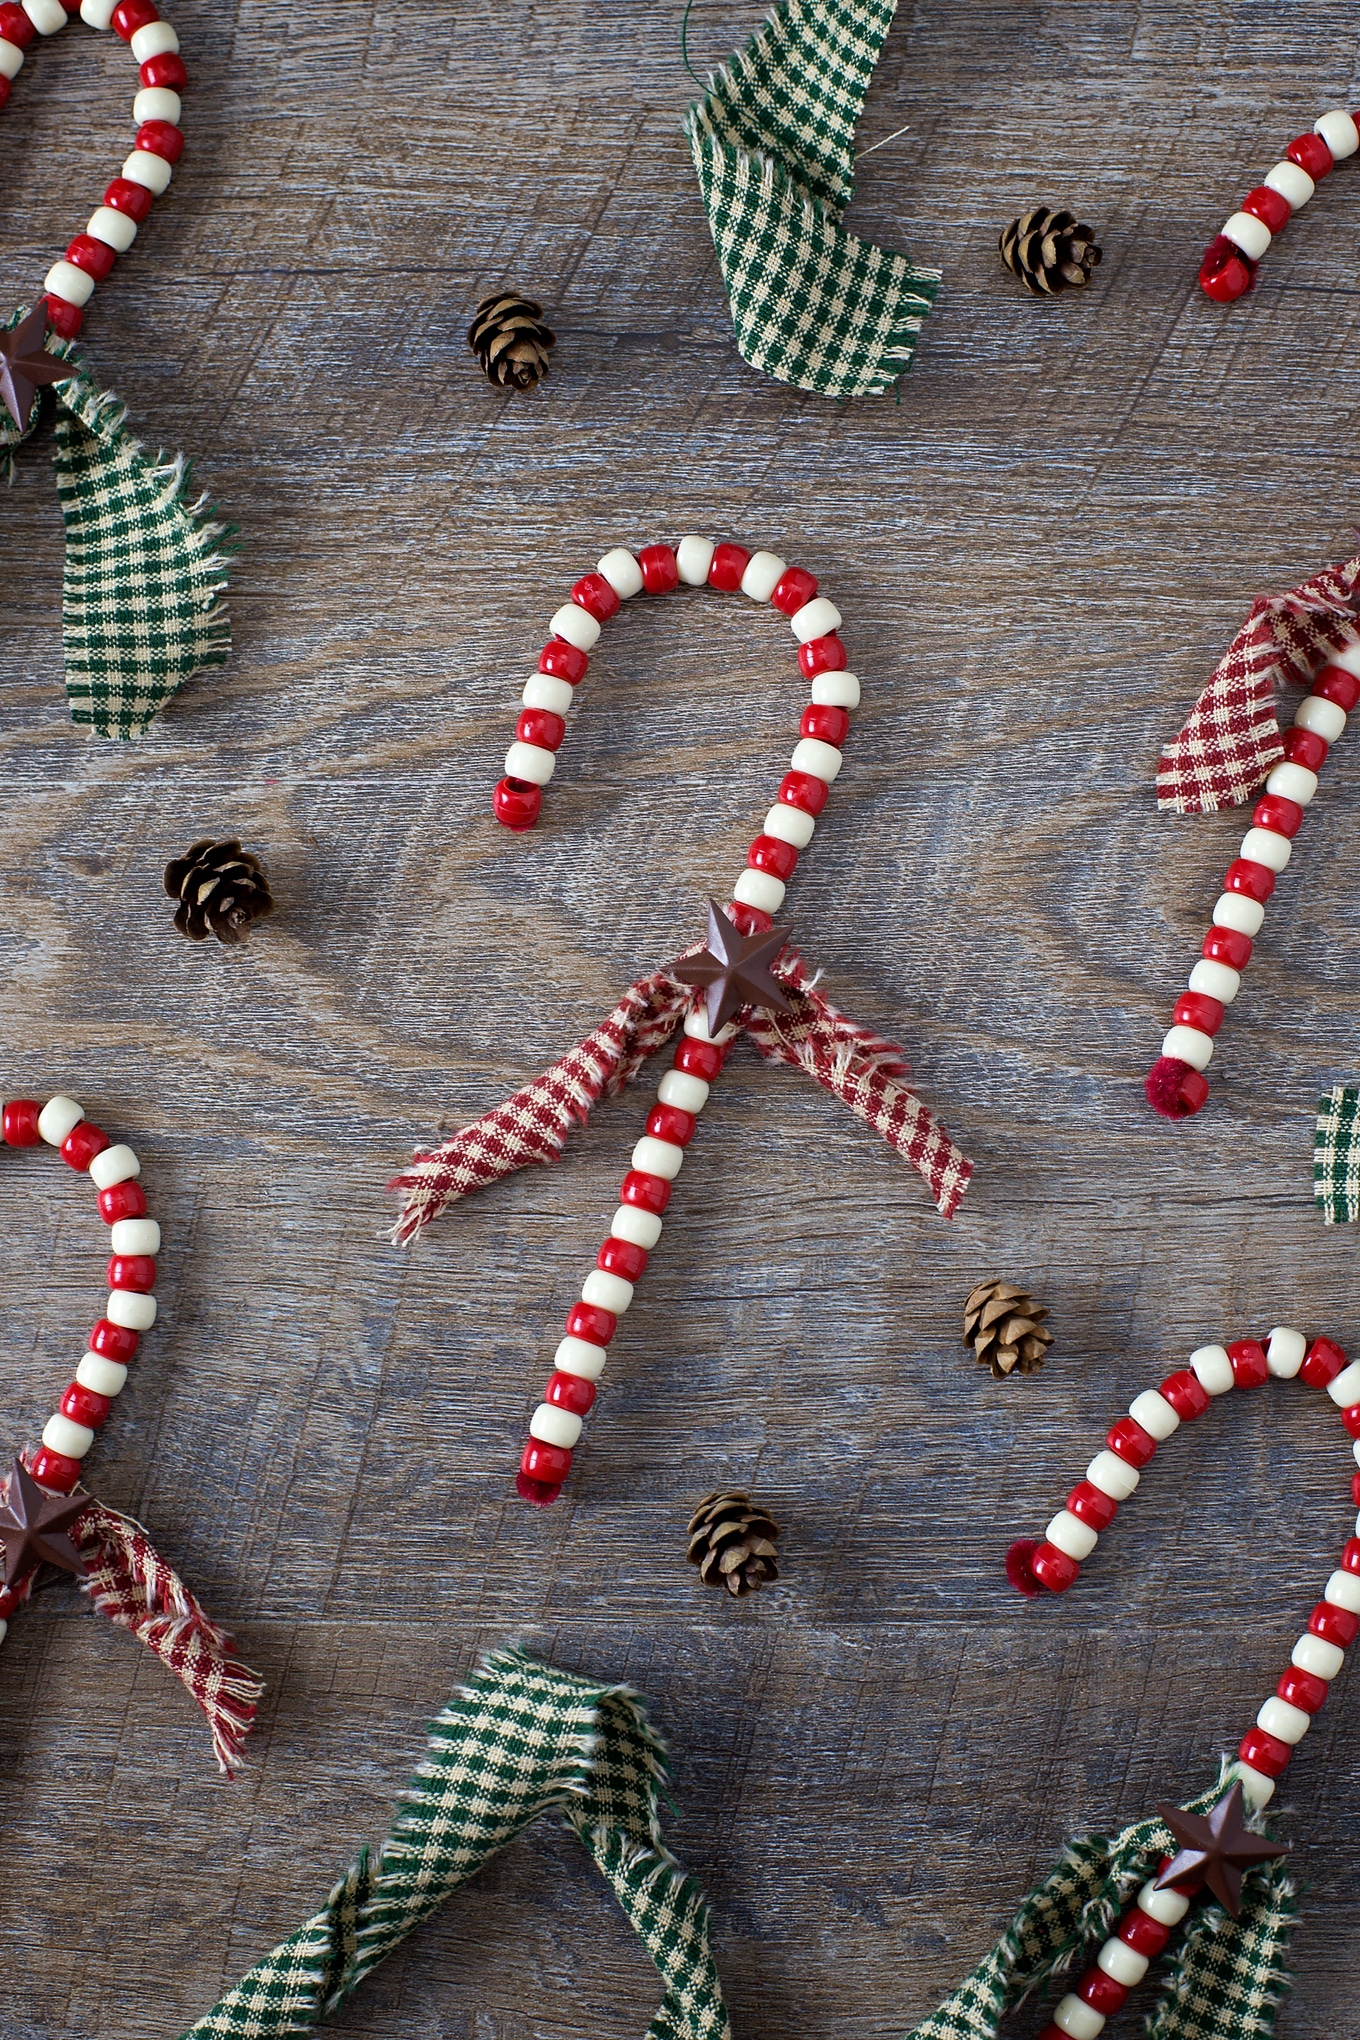 candy cane beads